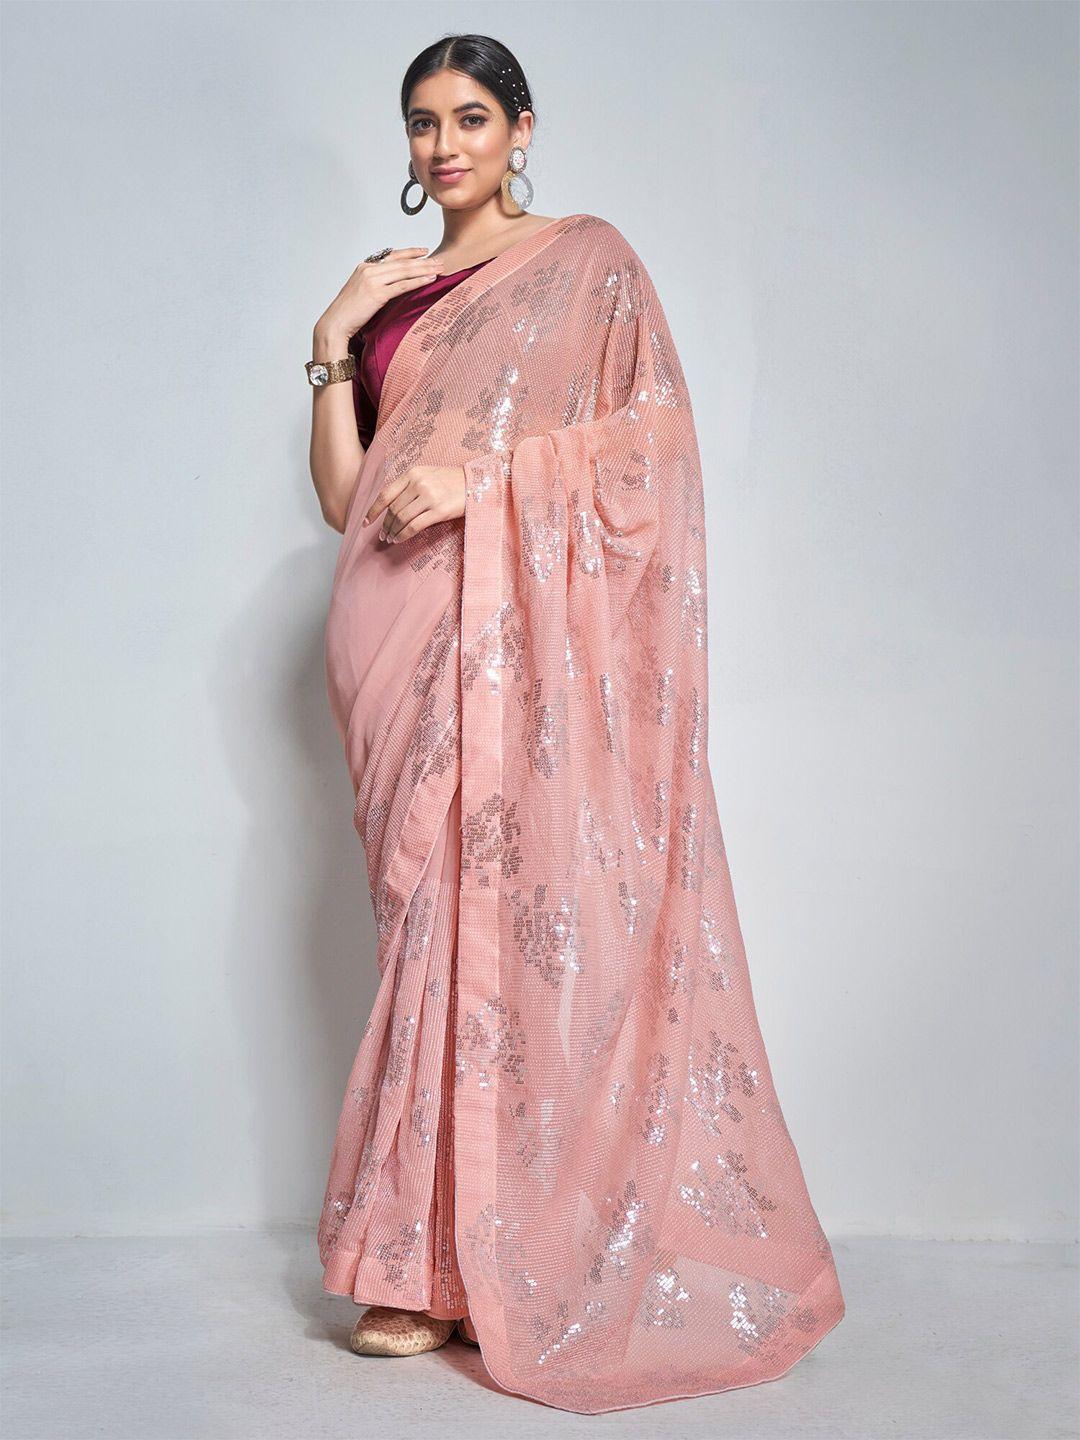 mitera peach & silver-toned floral embellished sequinned pure georgette designer saree